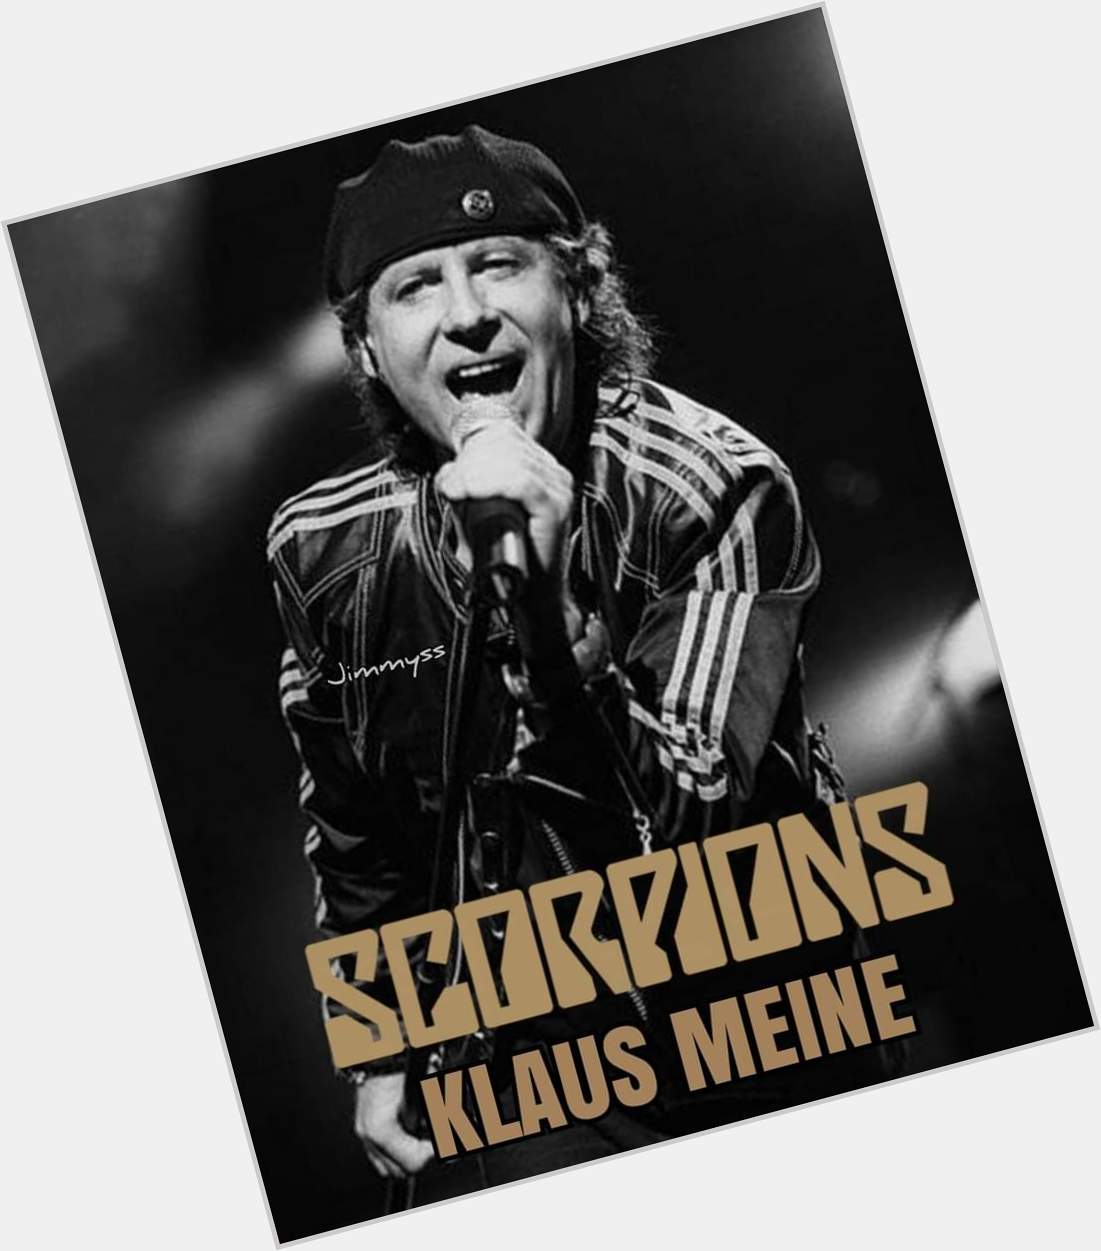 Klaus Meine! Happy Birthday!
Sorry for the delay all day.
75 years old! 